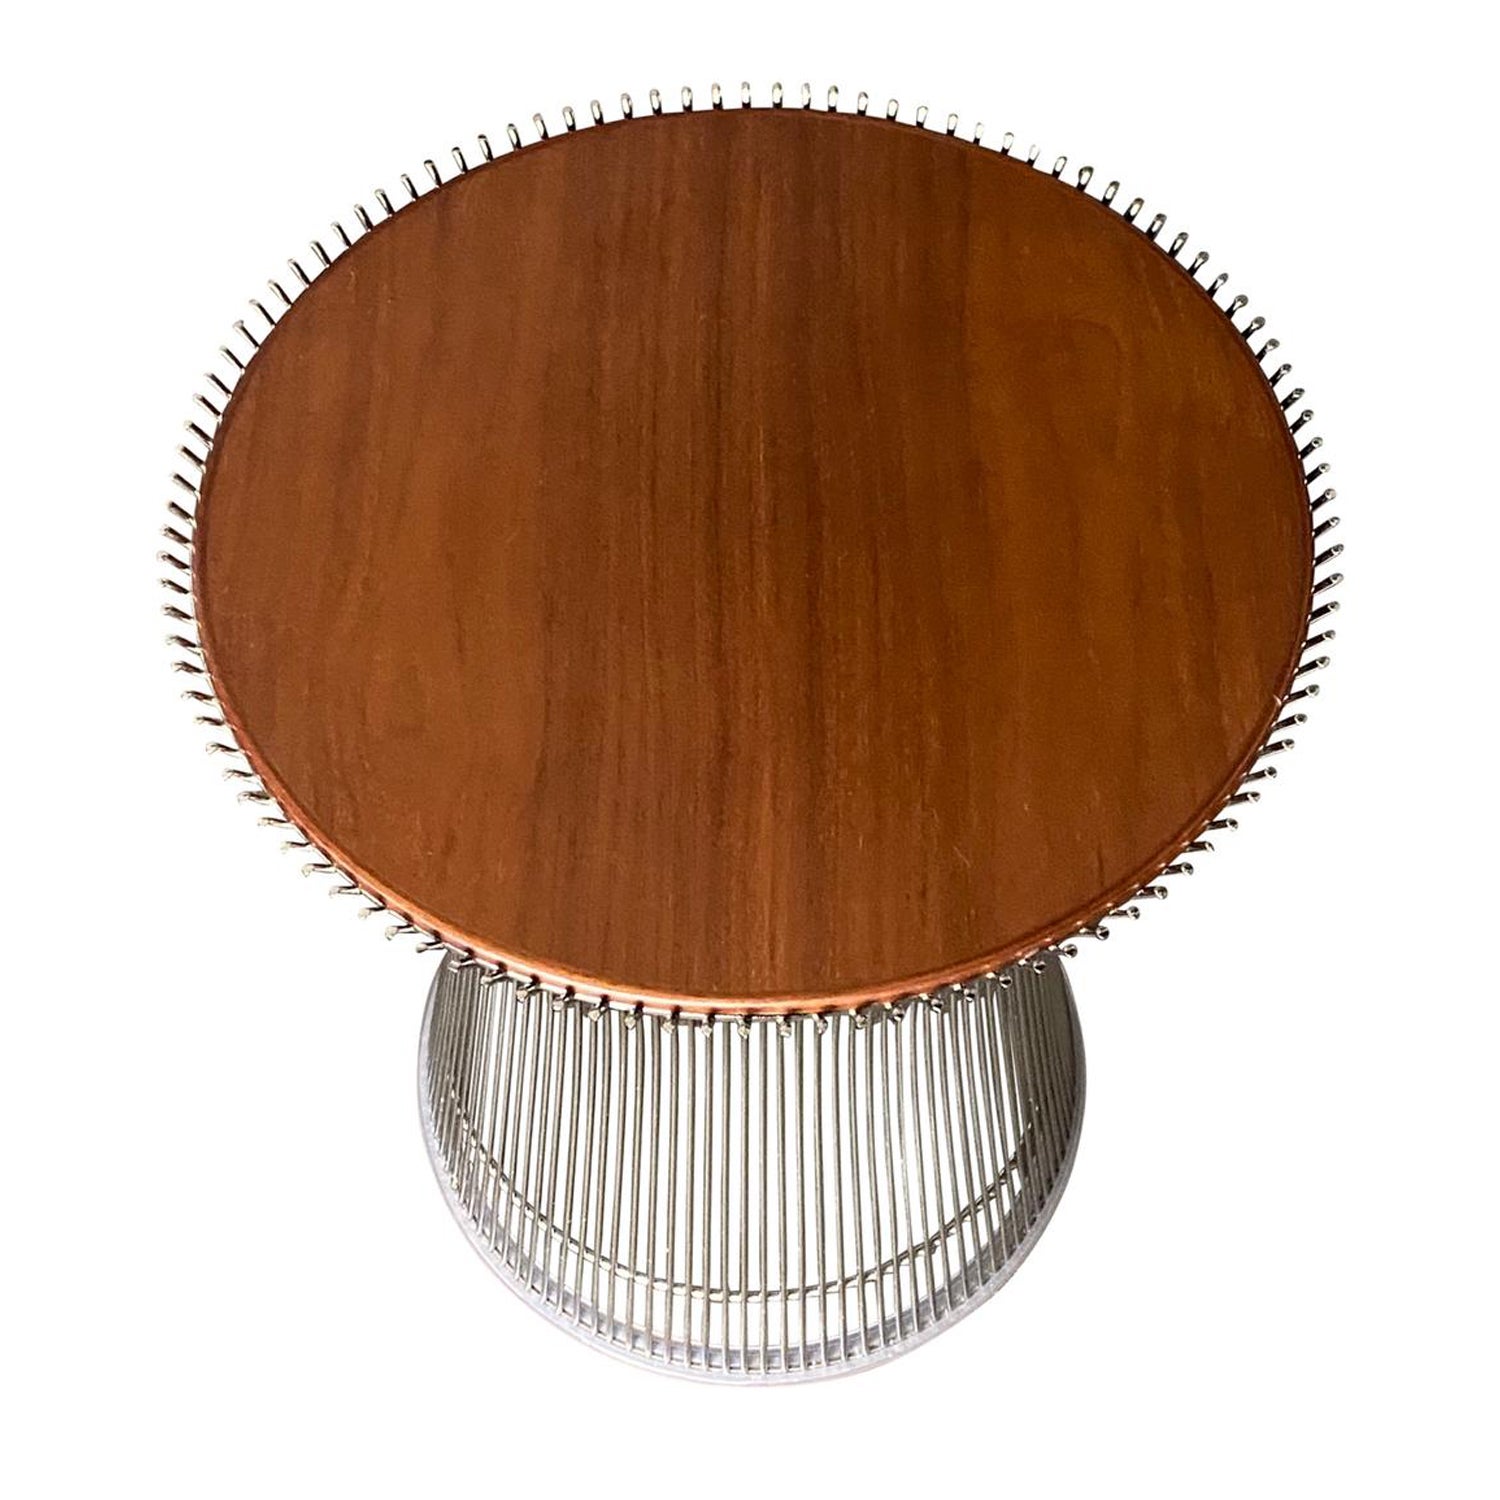 Gorgeous Knoll wire rod side table with walnut tray. Designed by Warren Platner. In great shape. Signed and guaranteed authentic.